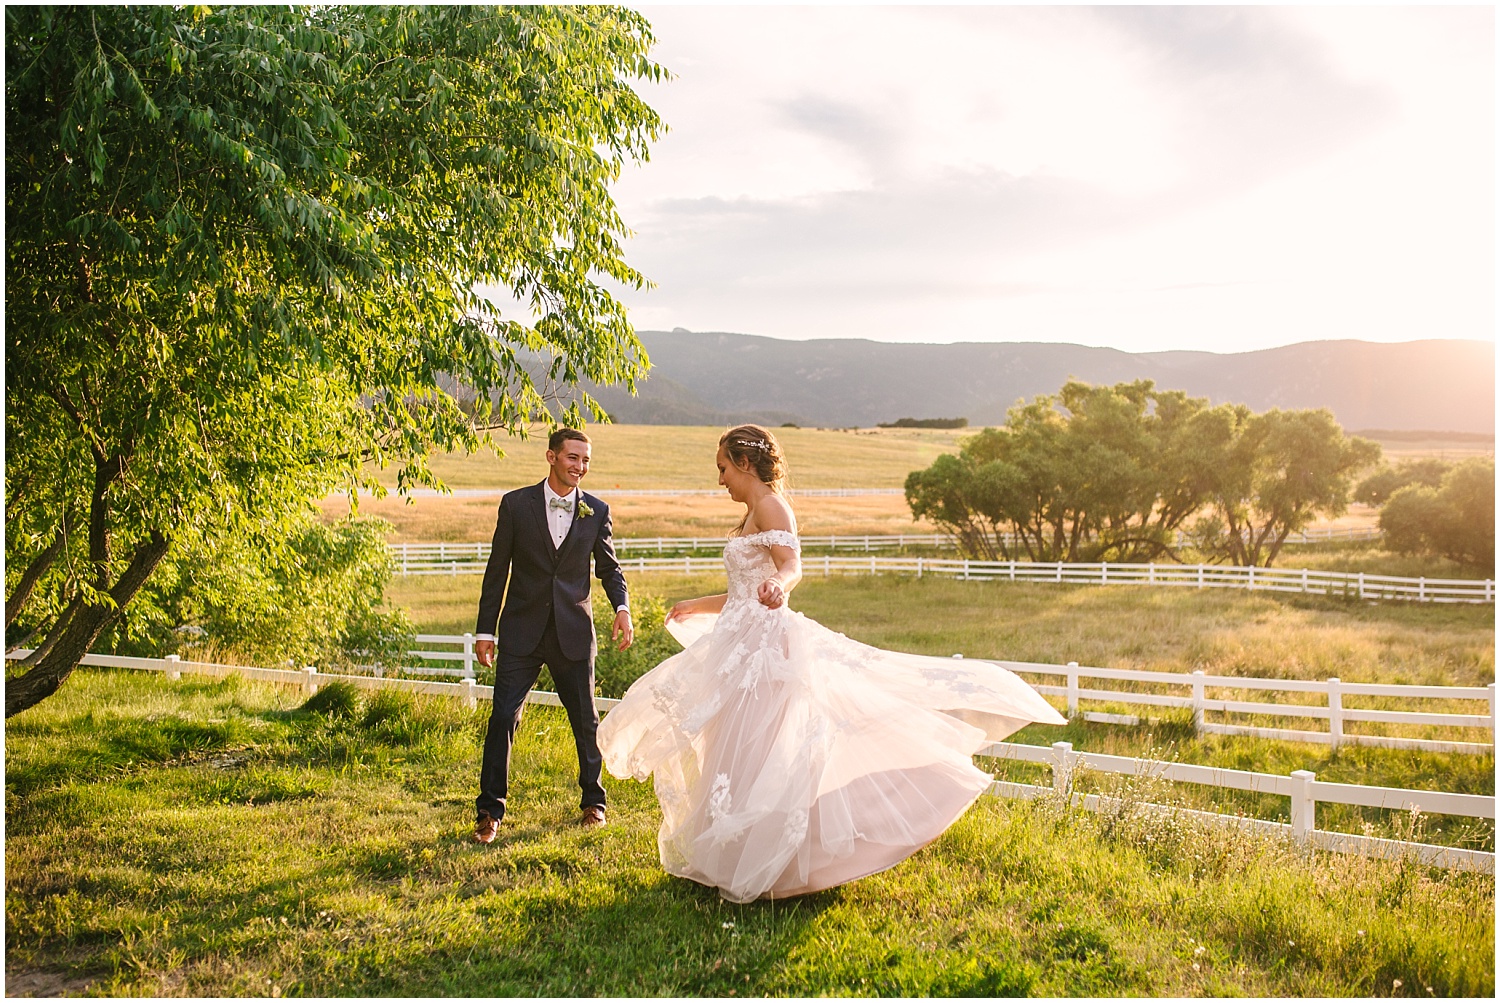 Bride and groom dance together at sunset overlooking the fields surrounding Crooked Willow Farms